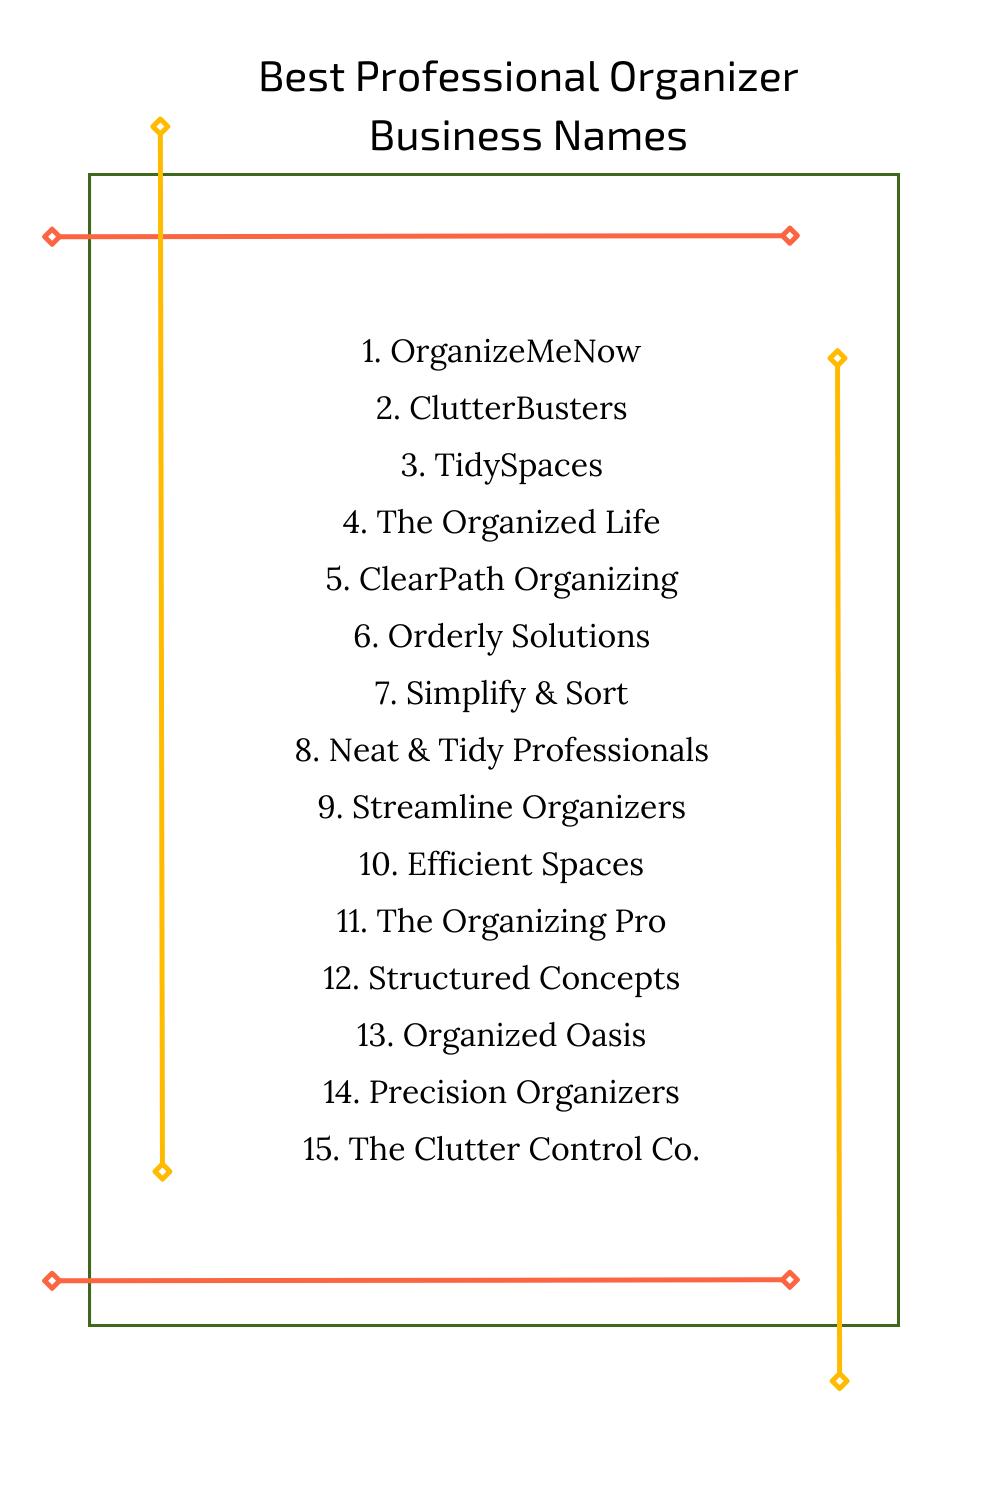 Best Professional Organizer Business Names